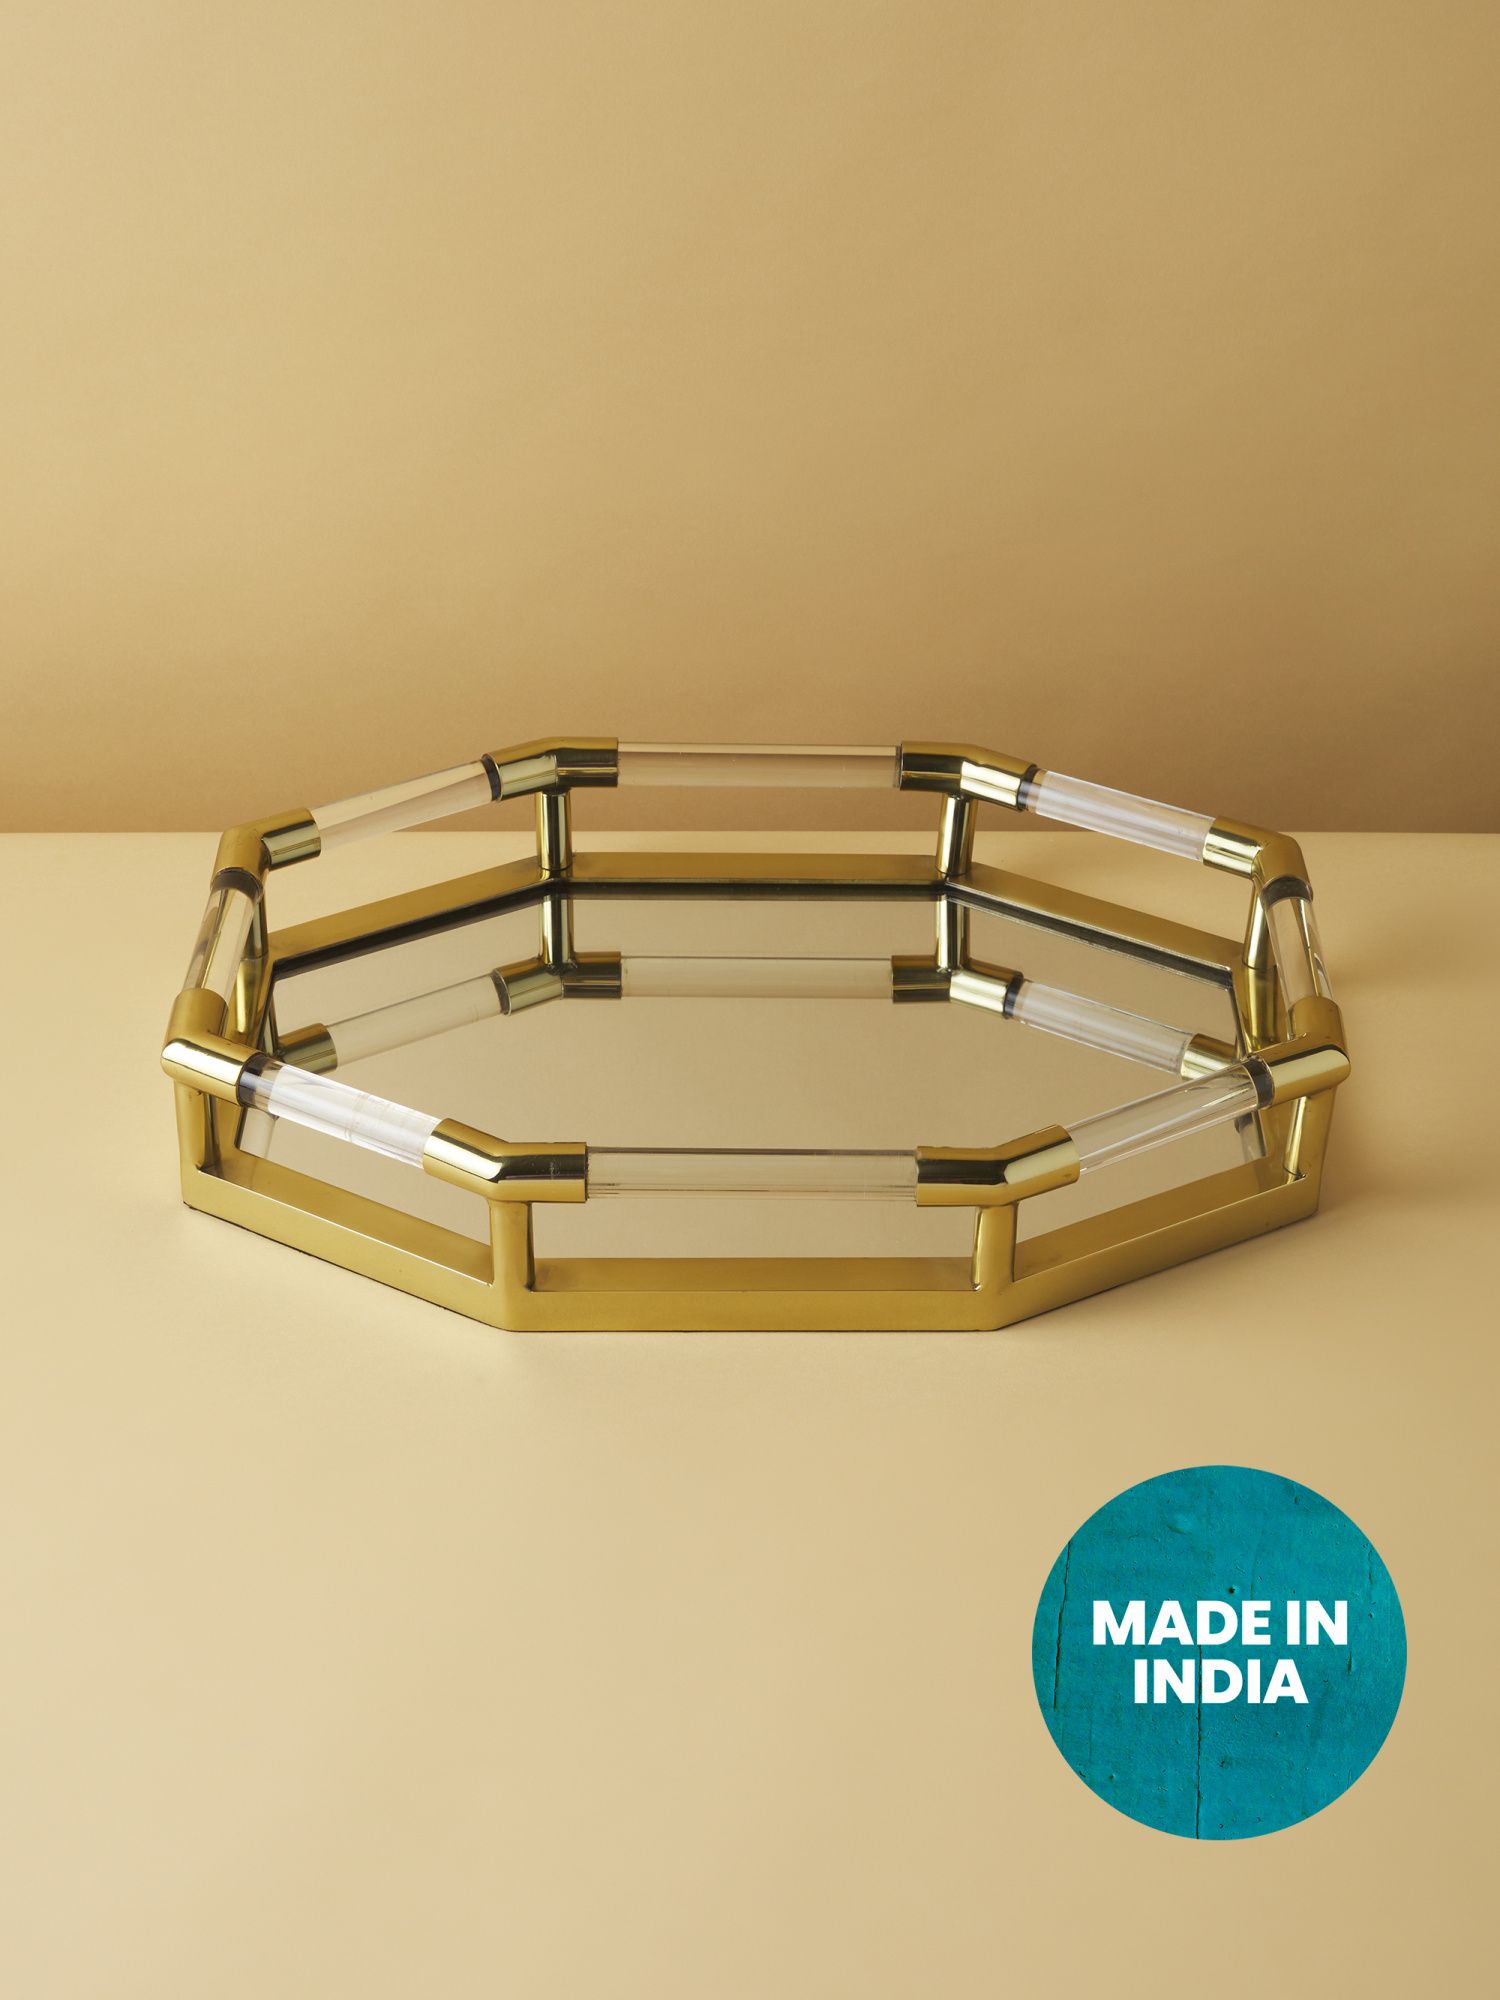 18in Acrylic Mirrored Decorative Tray | Decorative Objects | HomeGoods | HomeGoods